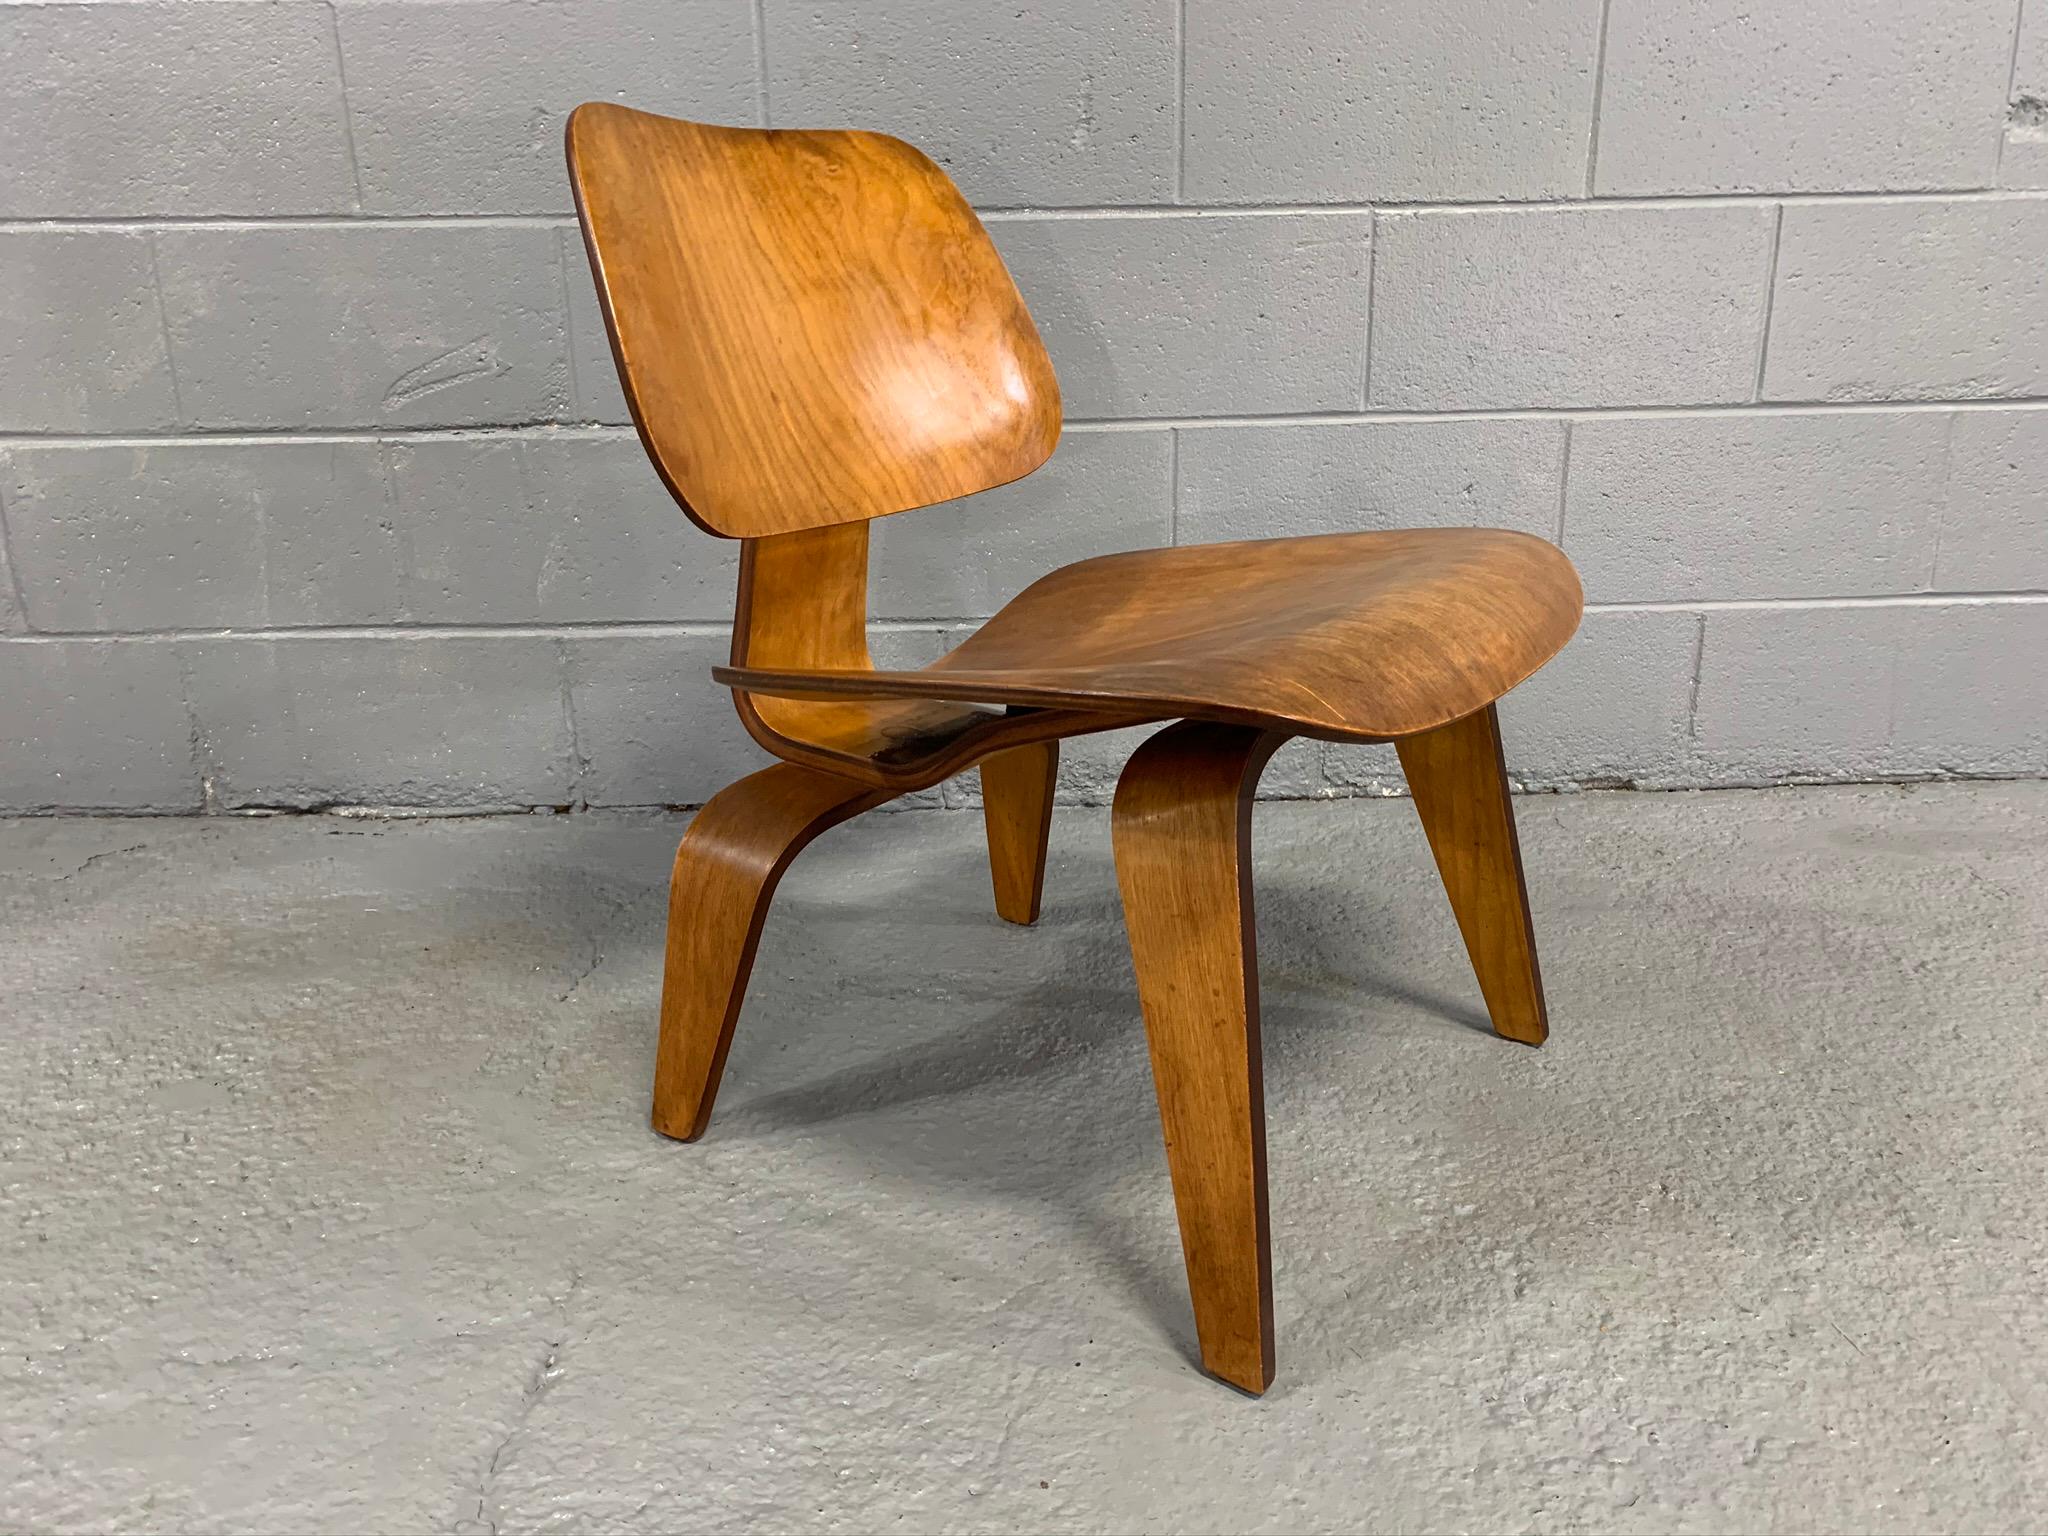 20th Century Charles Eames LCW Midcentury Lounge Chair in Maple for Herman Miller